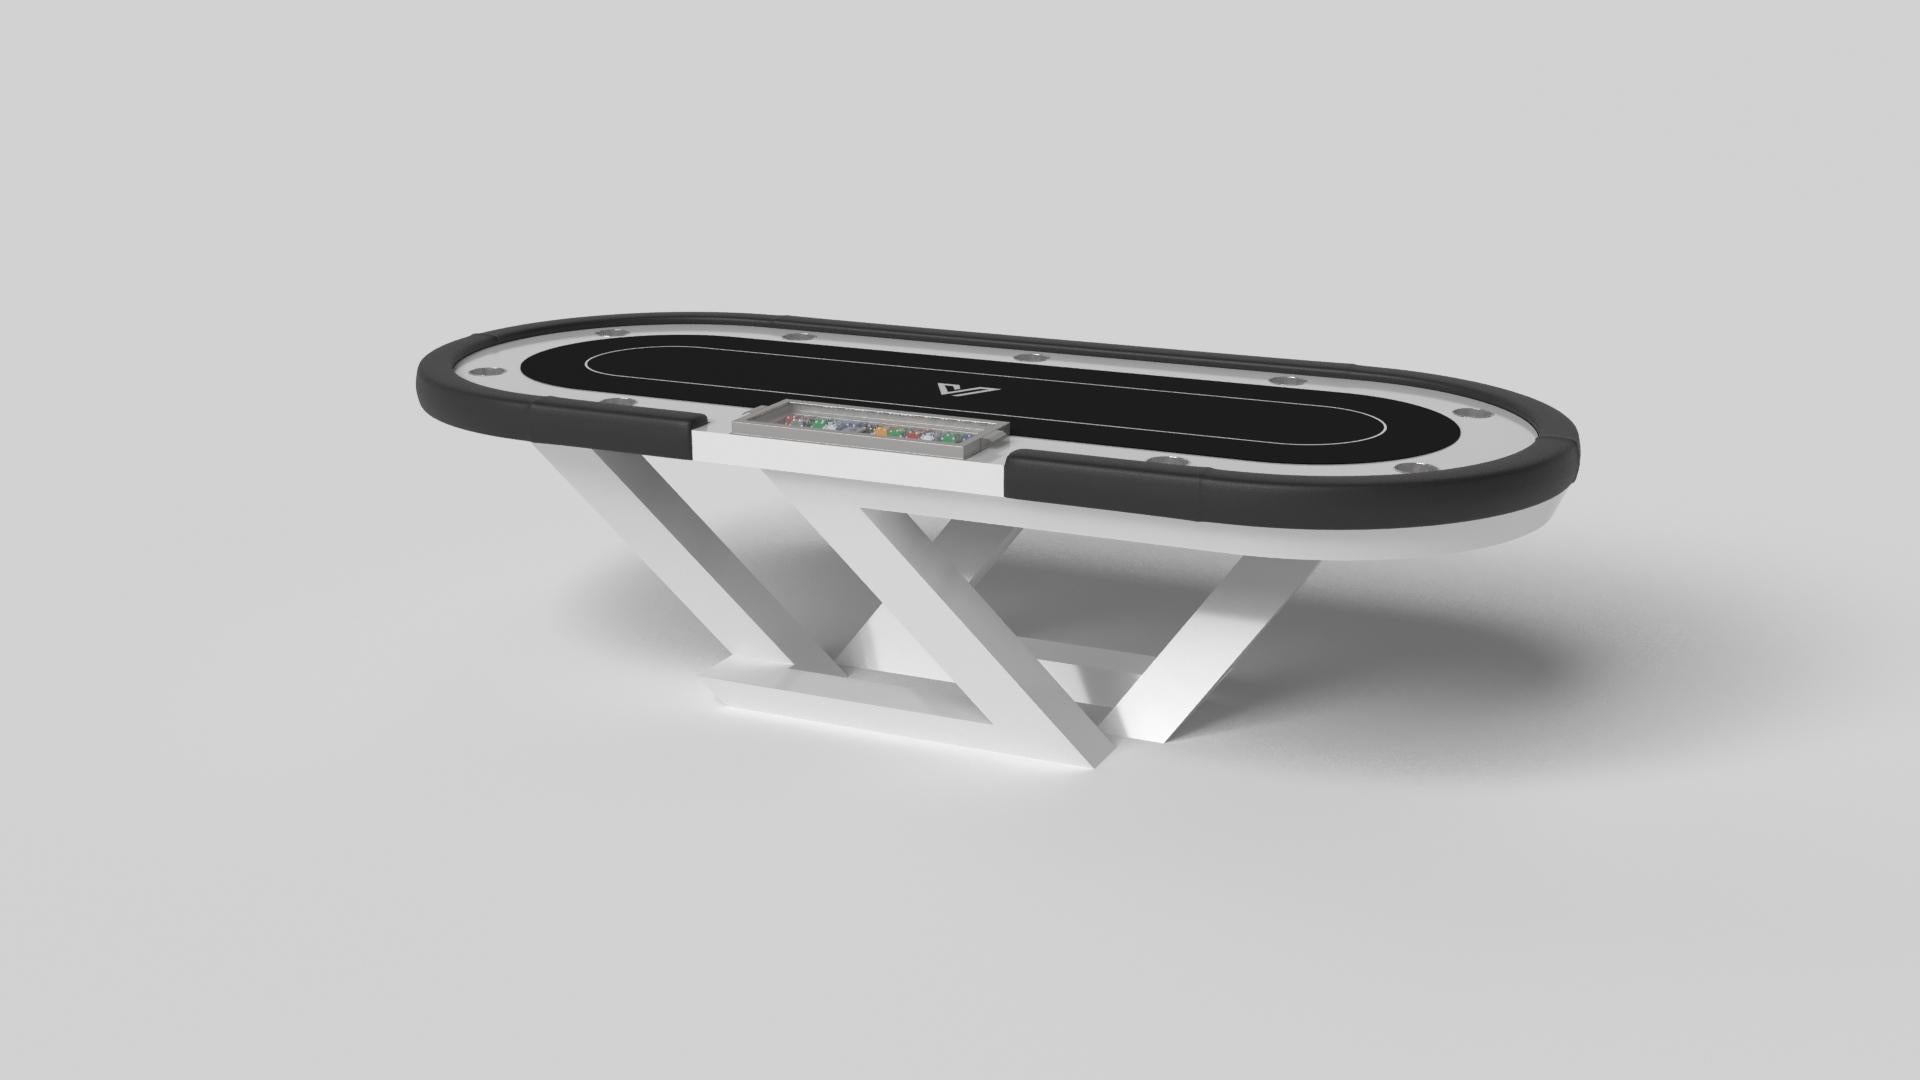 A contemporary composition of clean lines and sleek edges, the Trinity poker table in black chrome with red accent is an elegant expression of modern design. Handcrafted from durable metal with vibrant red accents and a regulation top for